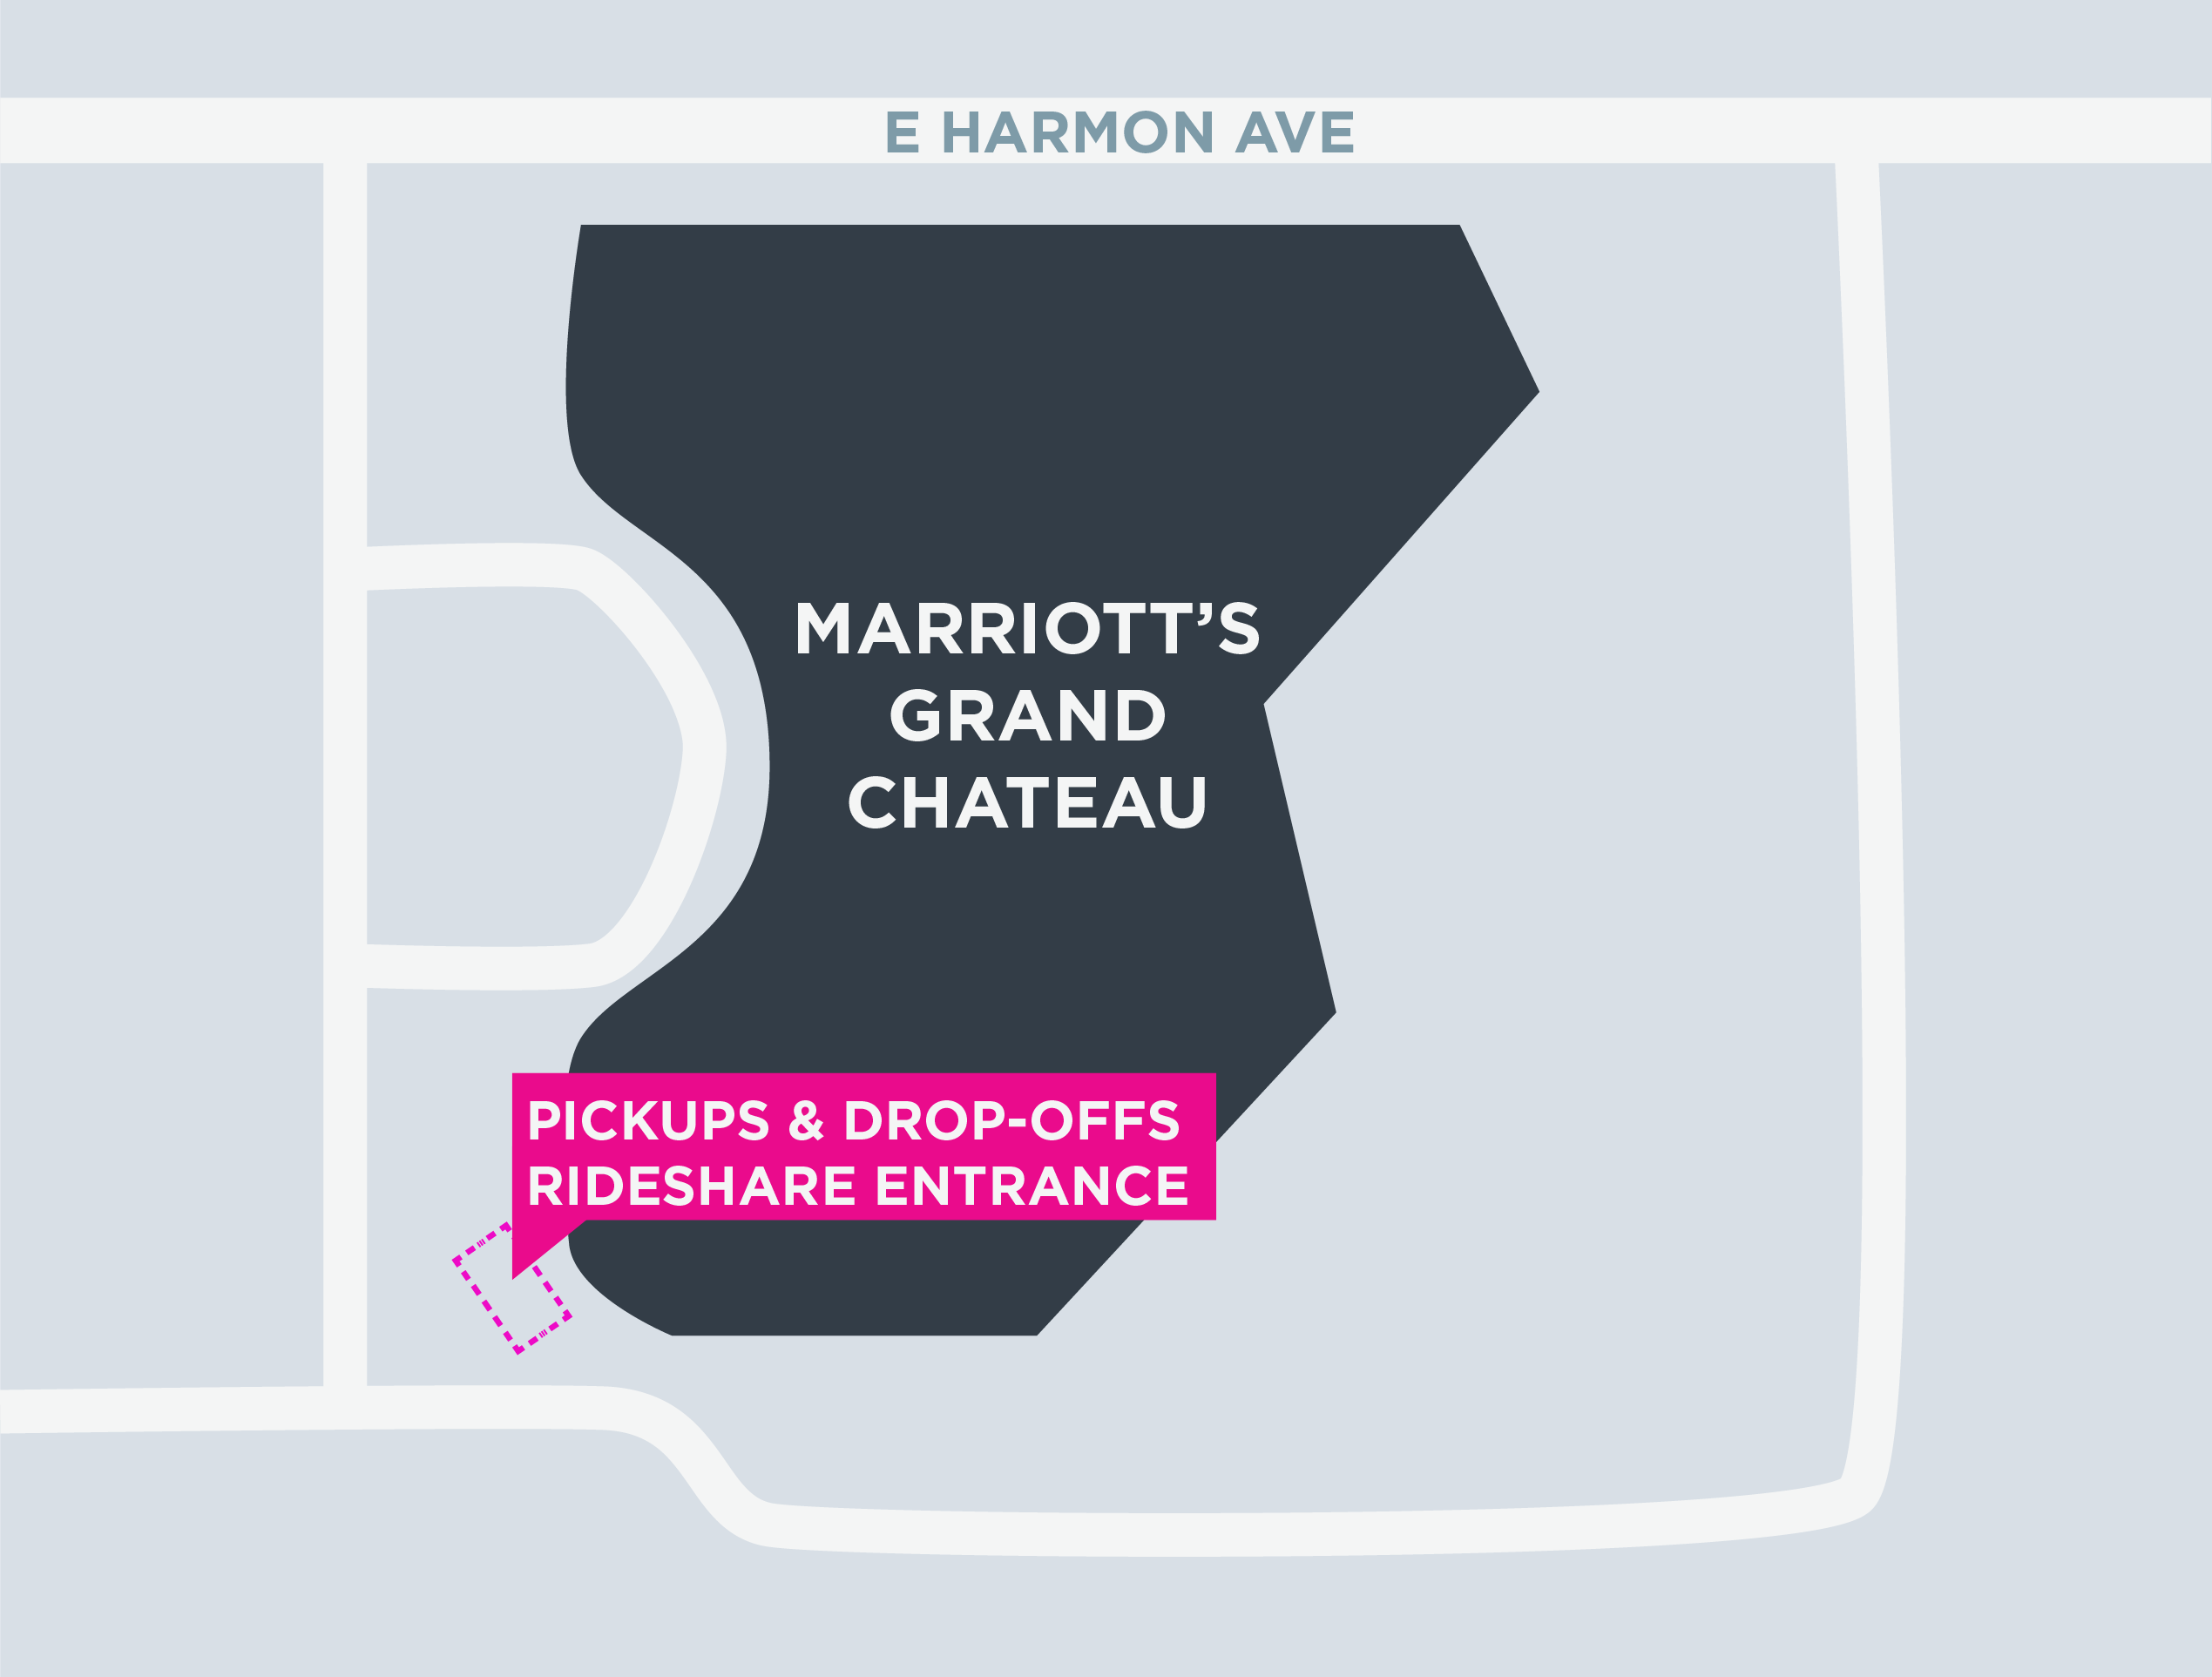 Map of the pickup and drop-off area at the Marriott's Grand Chateau in Las Vegas.